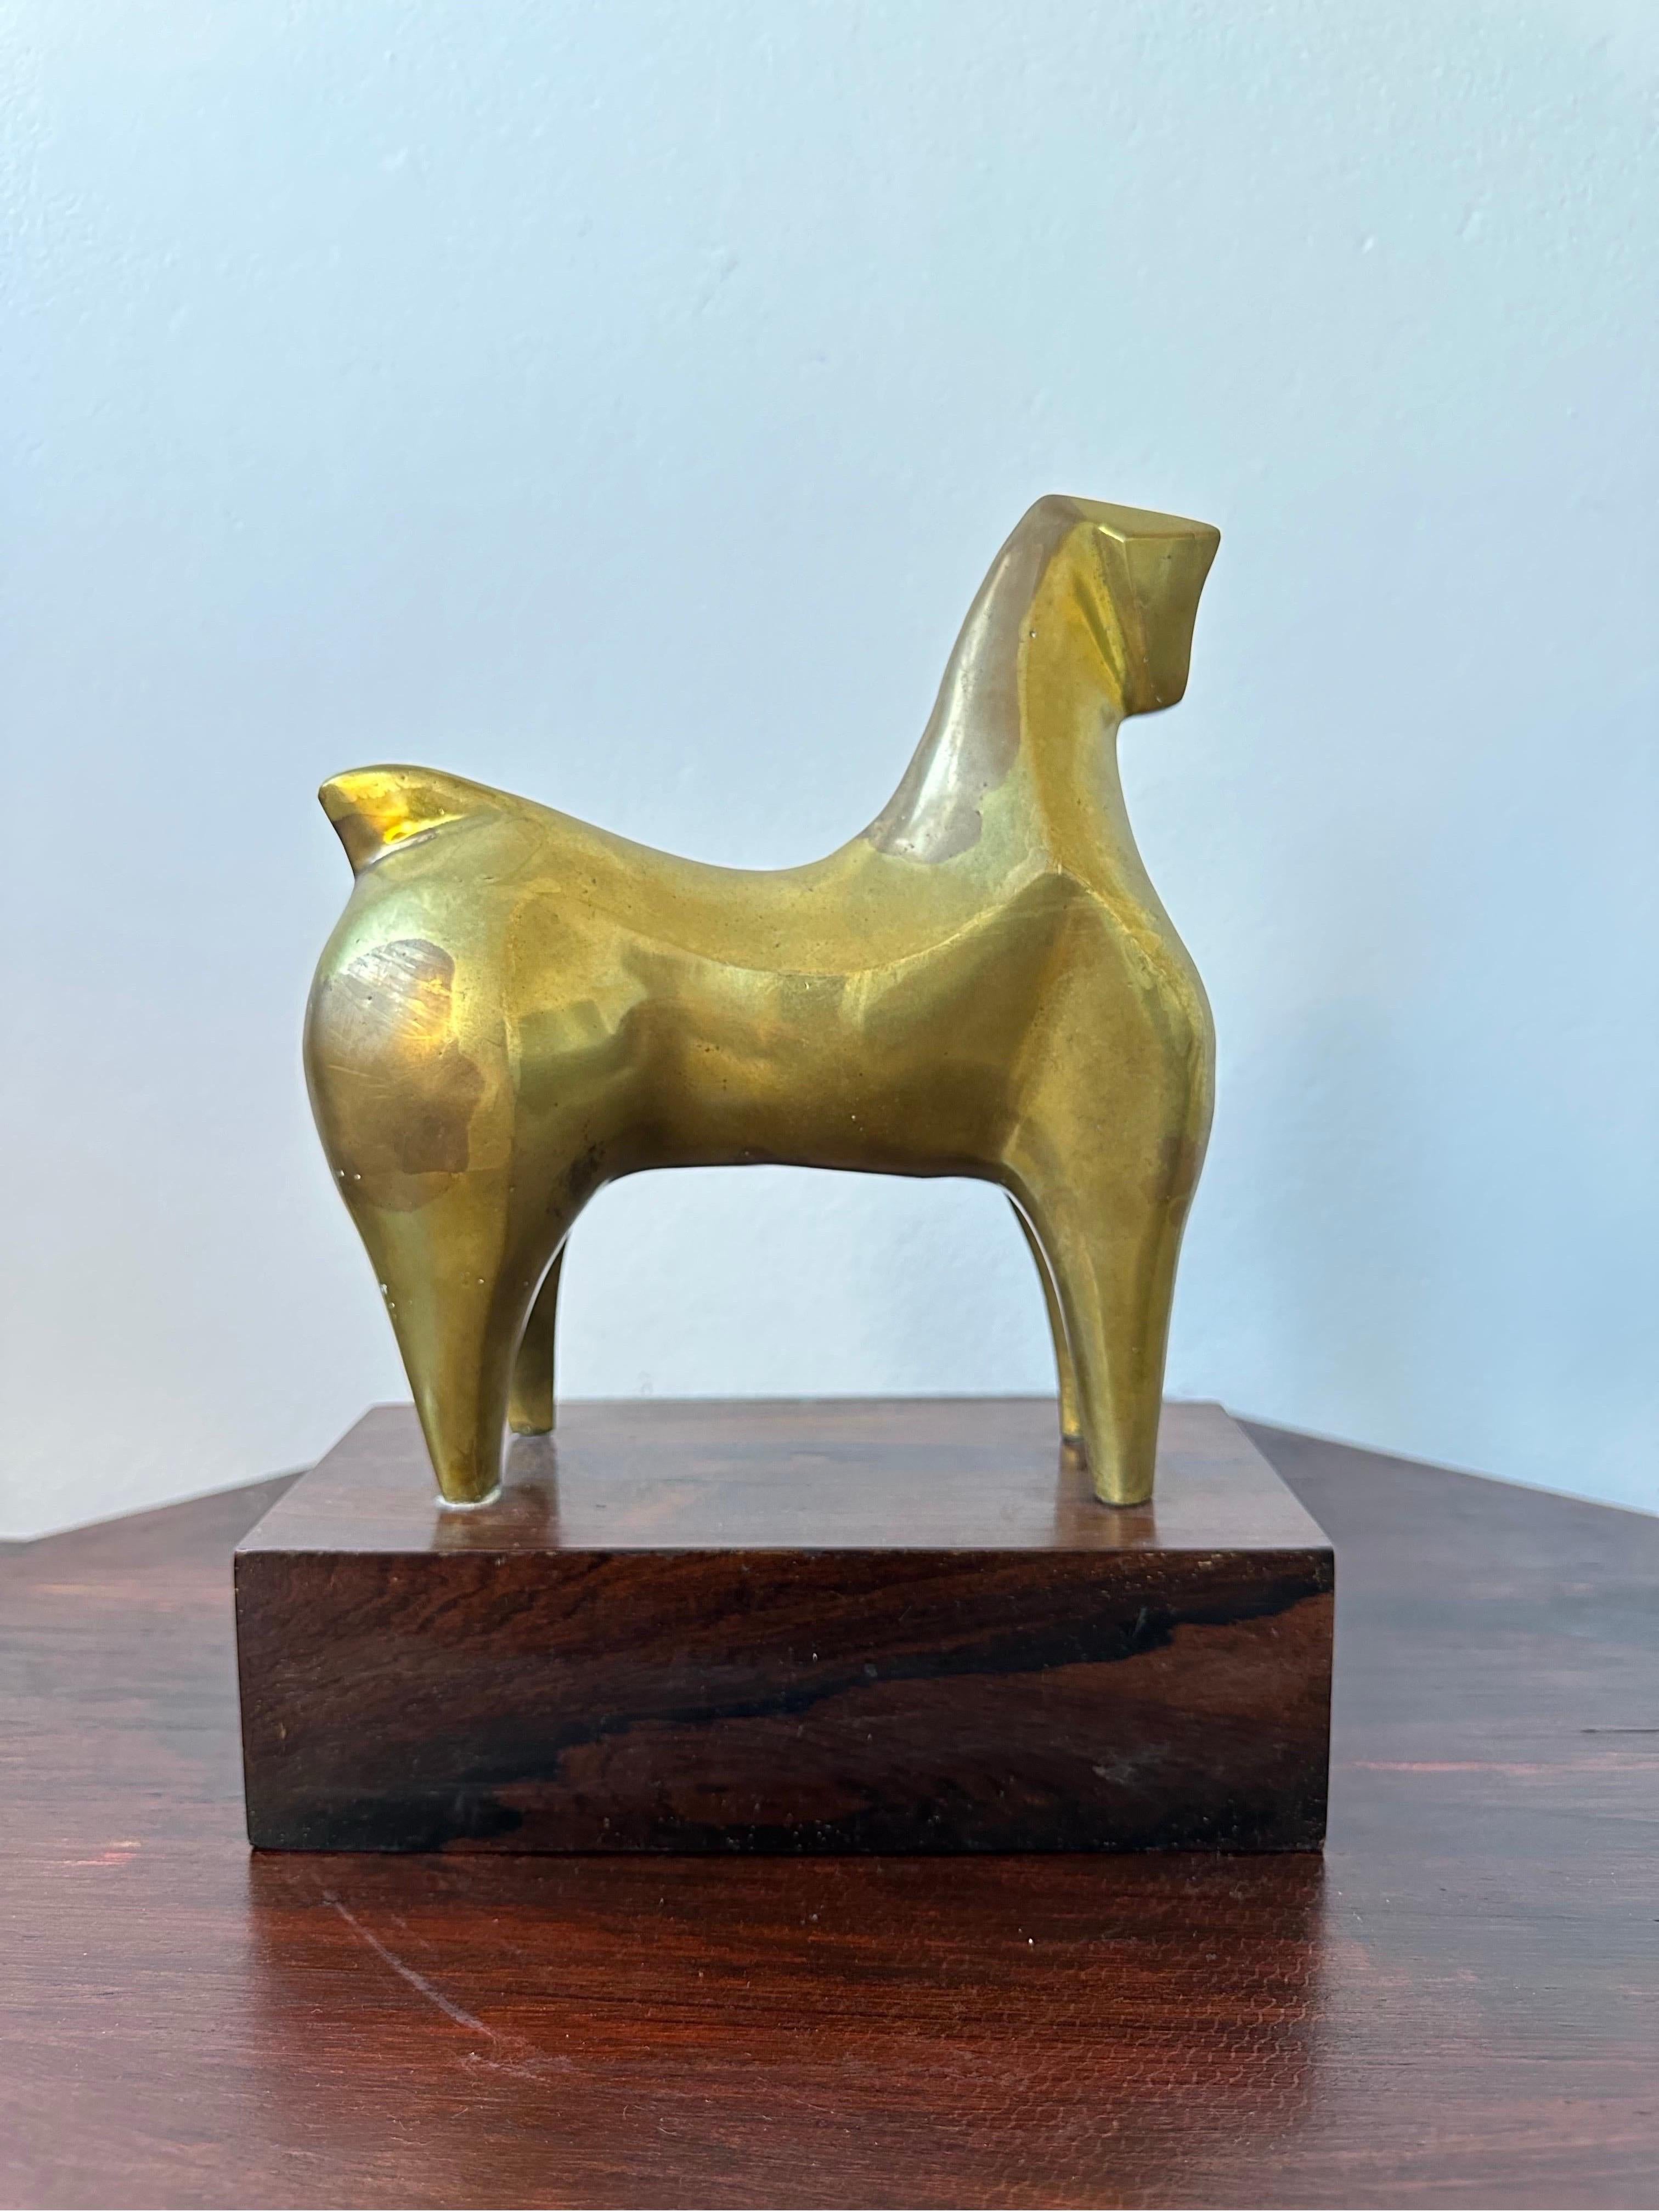 20th Century Mid-Century Brazilian Modernist Bronze Horse Sculpture on a Rosewood Base, 1960s For Sale